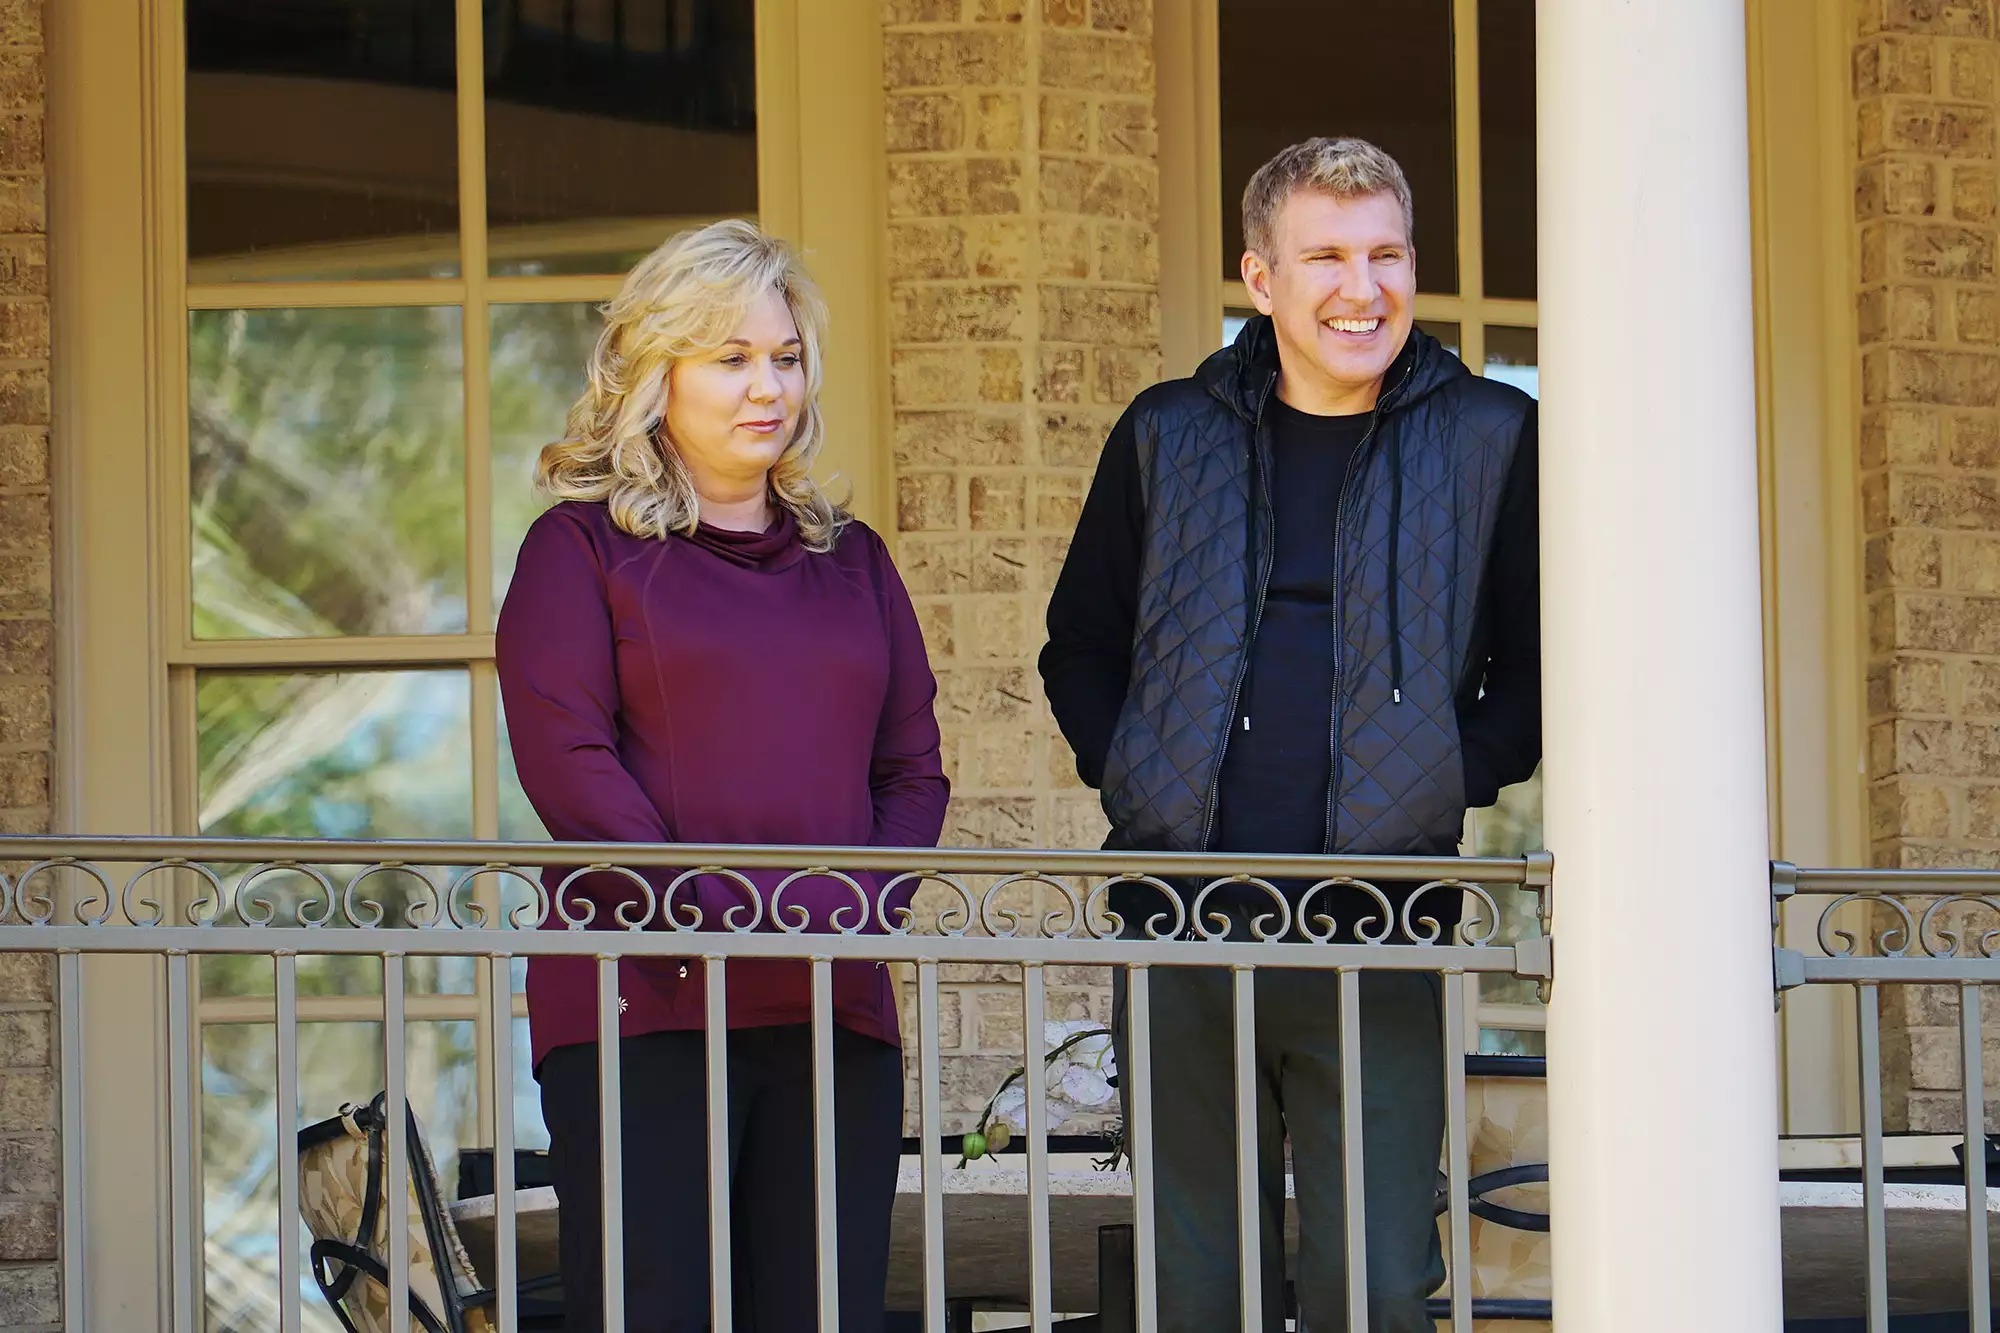 Todd Chrisley Asks for Prayer After 'Overwhelming' Gifts Are Sent After His Federal Conviction